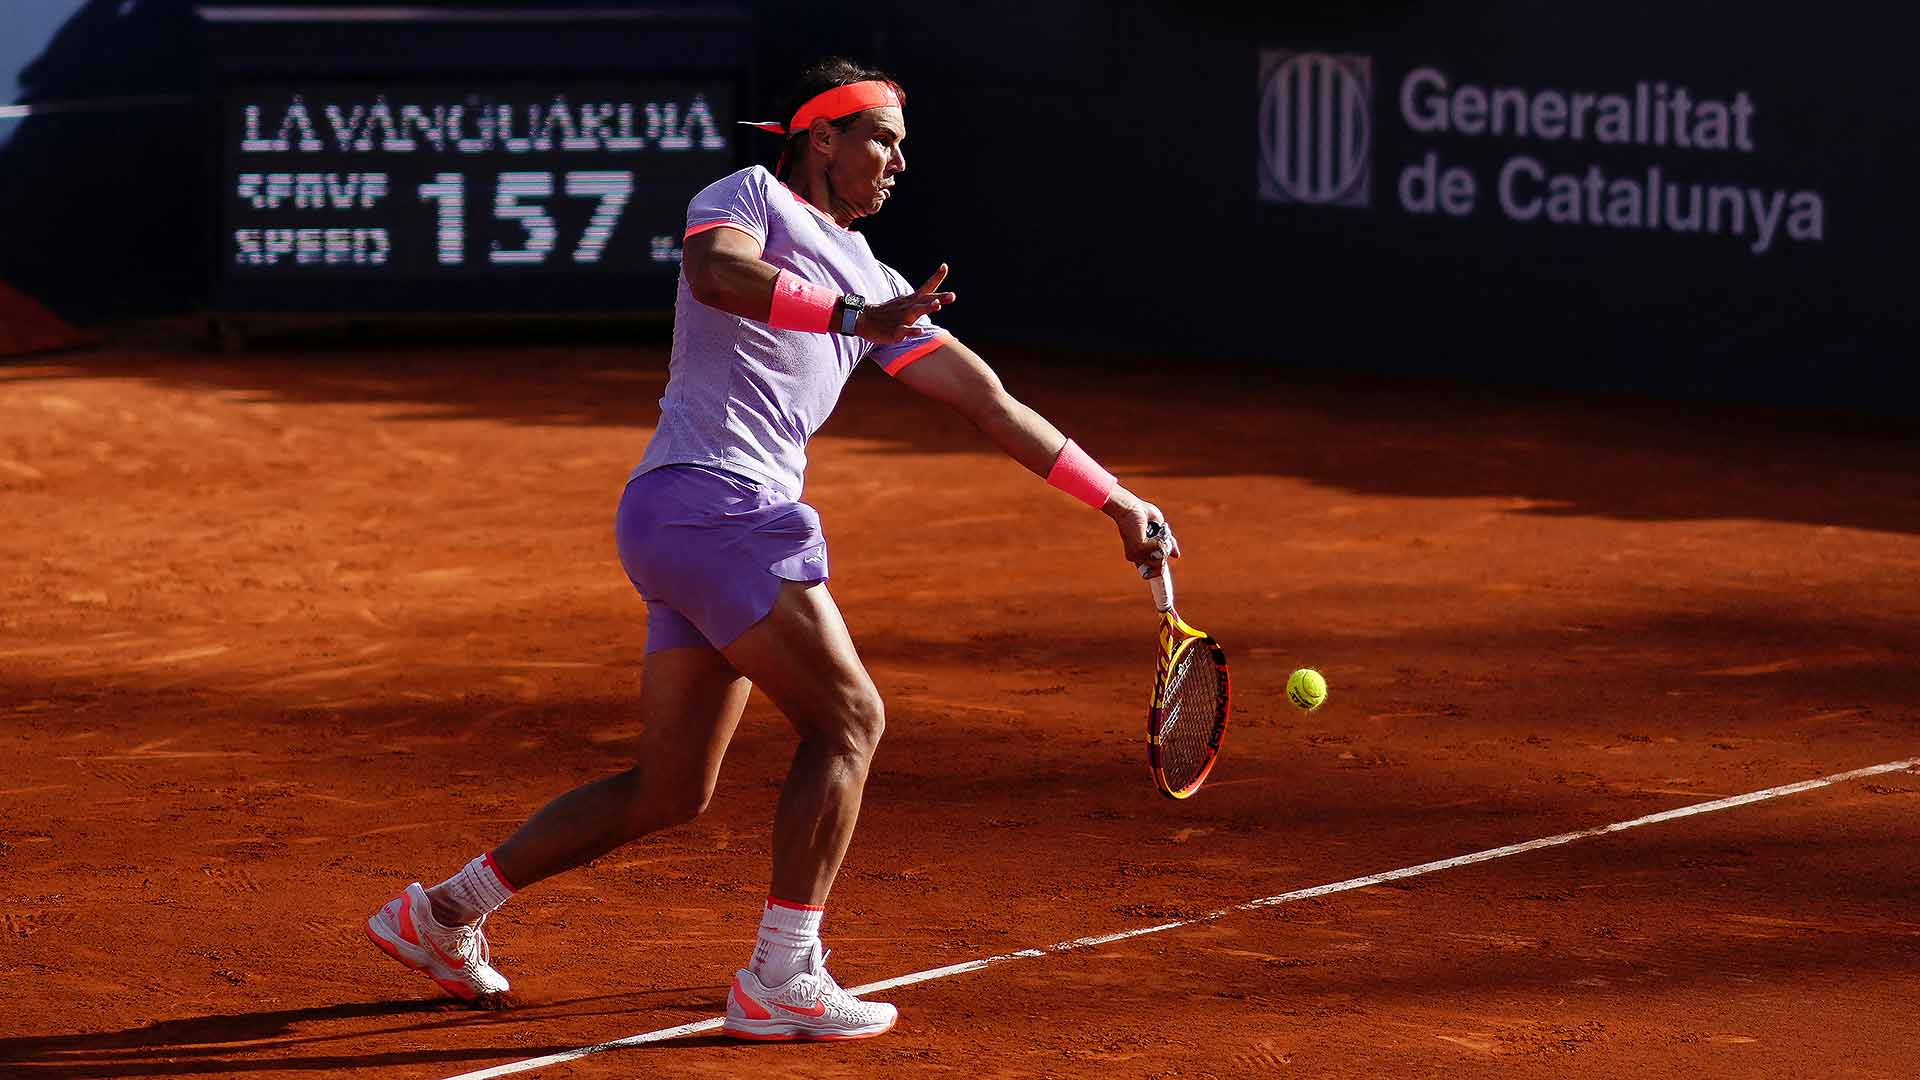 Rafael Nadal makes a winning return to clay on home soil in Barcelona.